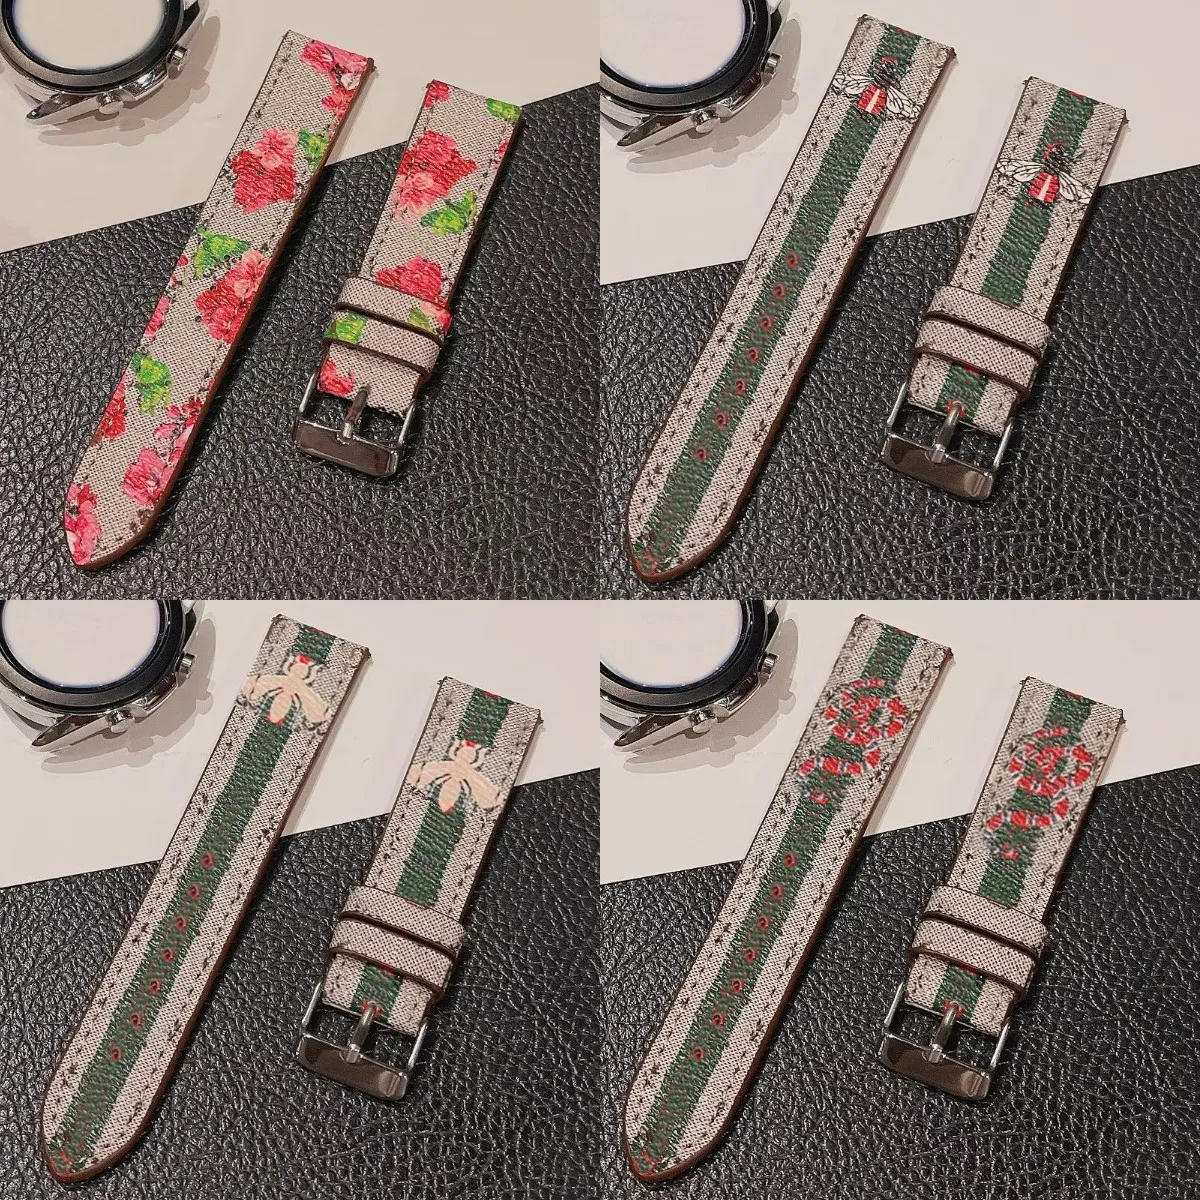 20mm 22mm Smart Straps Watch Band For Samsung Galaxy Watch 4/46mm/42mm/Active 2/correa Gear S3 Bracelet G Luxury Designer PU Leather Colorful Flower Bee Snake Watchband